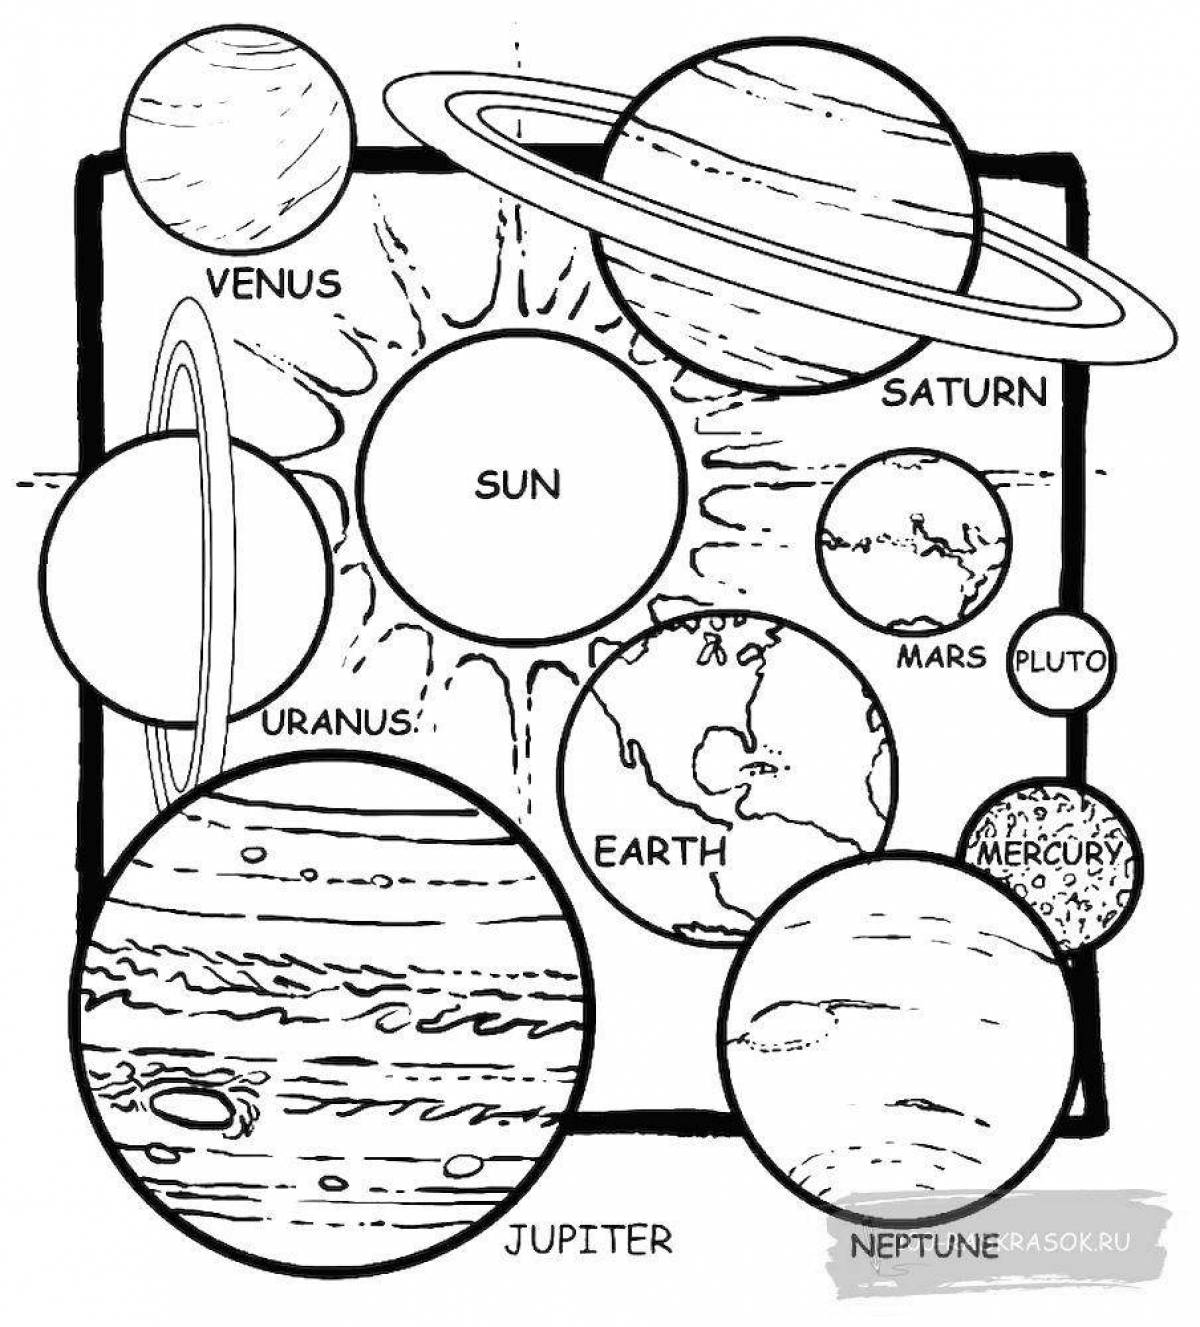 Coloring book for children with bright solar system